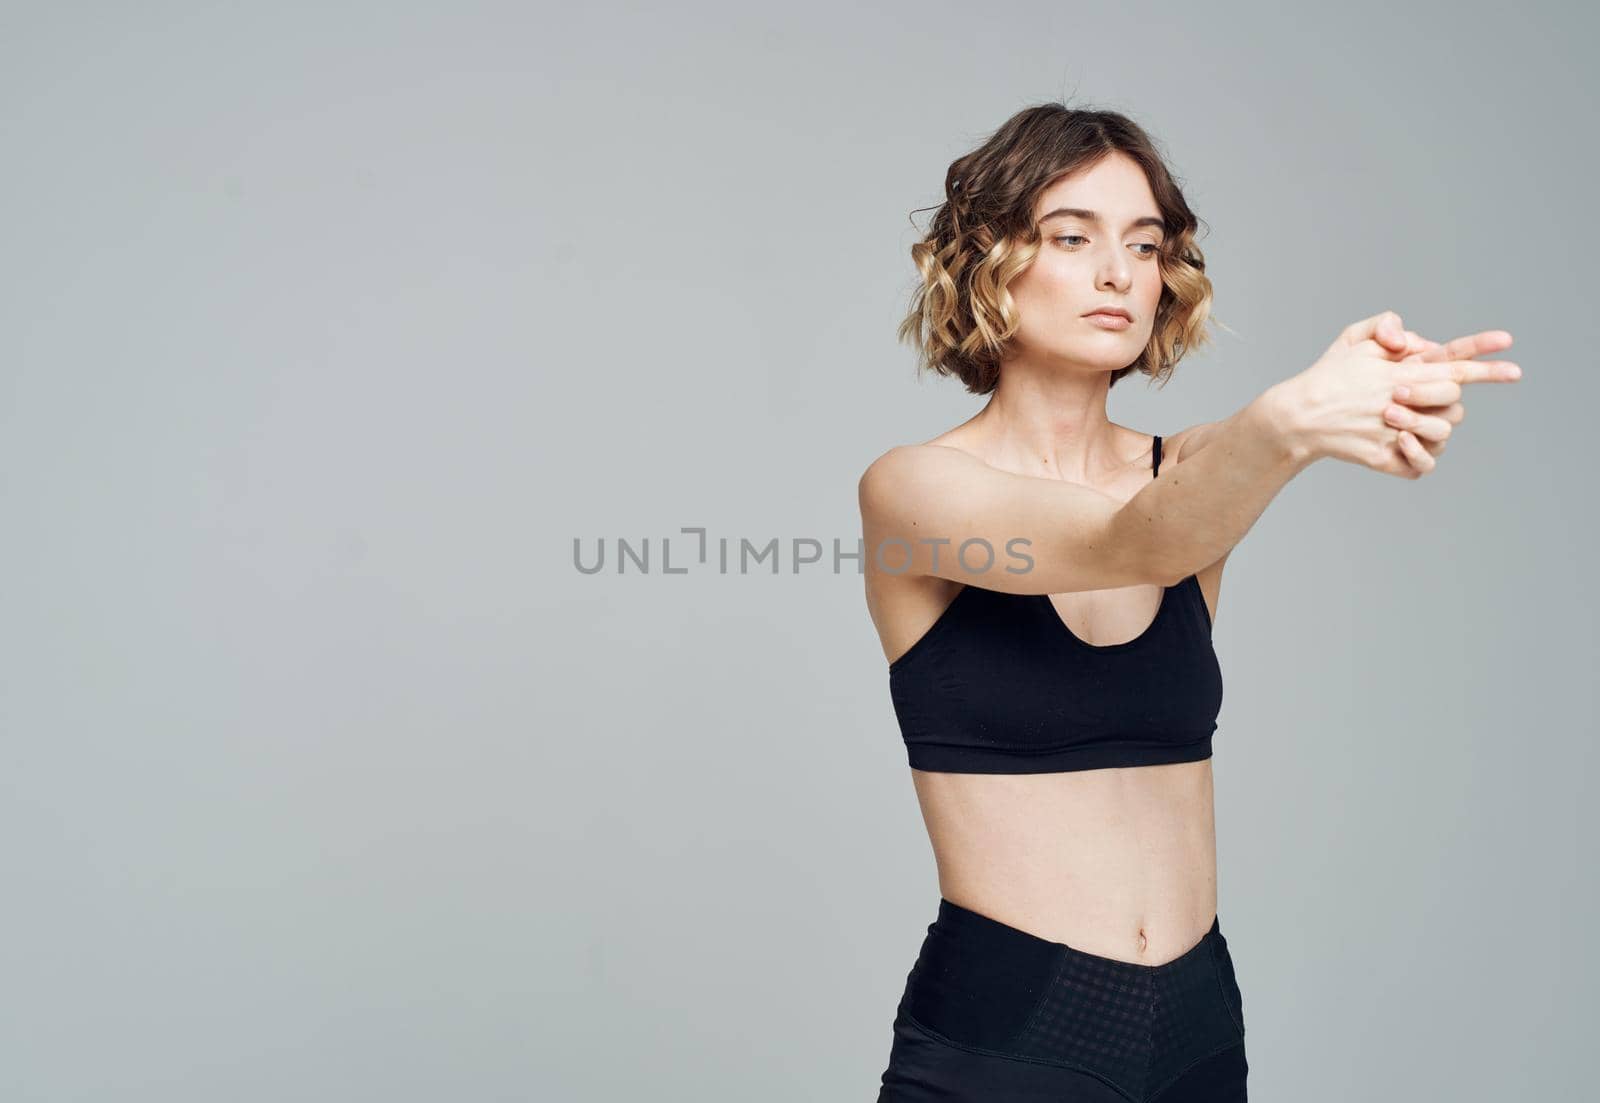 A woman in dark sportswear on a gray background gestures with her hands. High quality photo